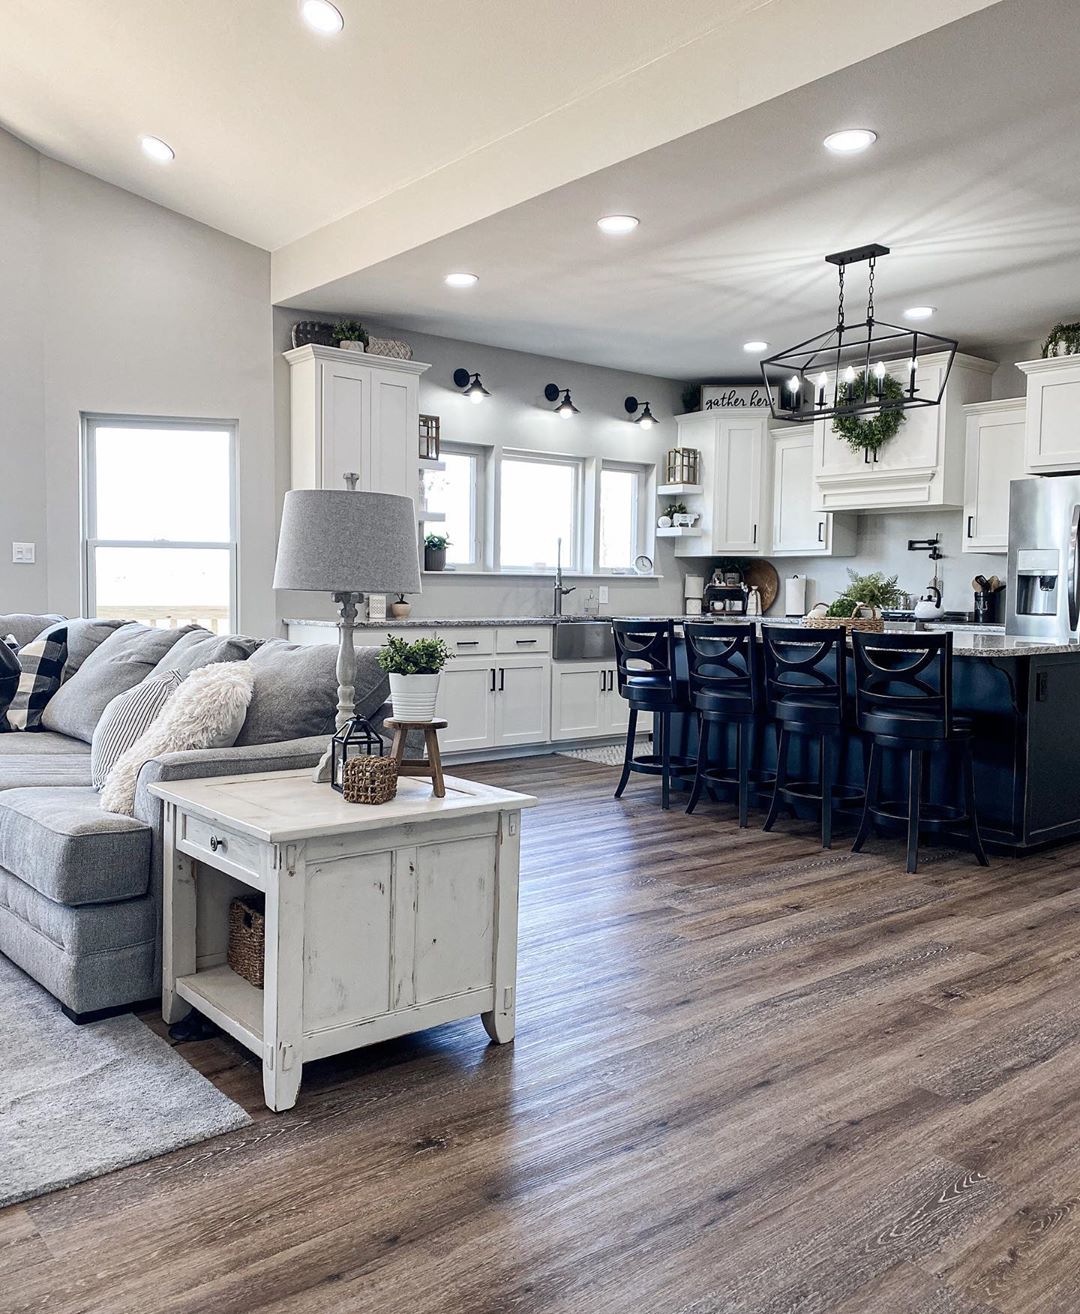 Home with open floor plan. Photo by Instagram user @bear_creek_farmhouse